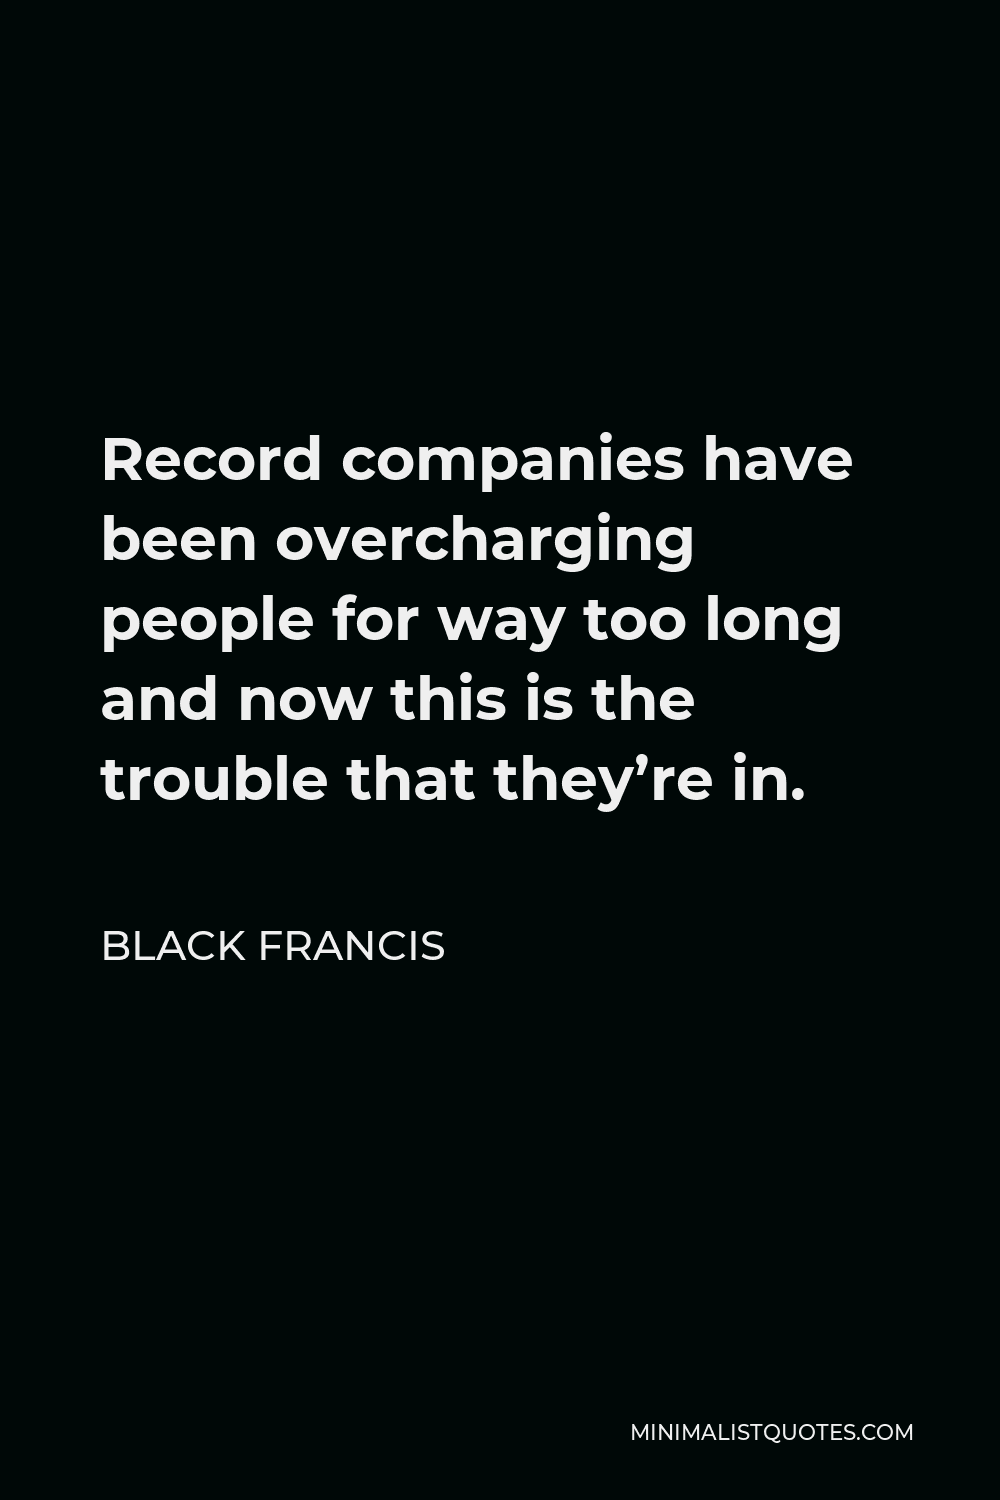 Black Francis Quote - Record companies have been overcharging people for way too long and now this is the trouble that they’re in.